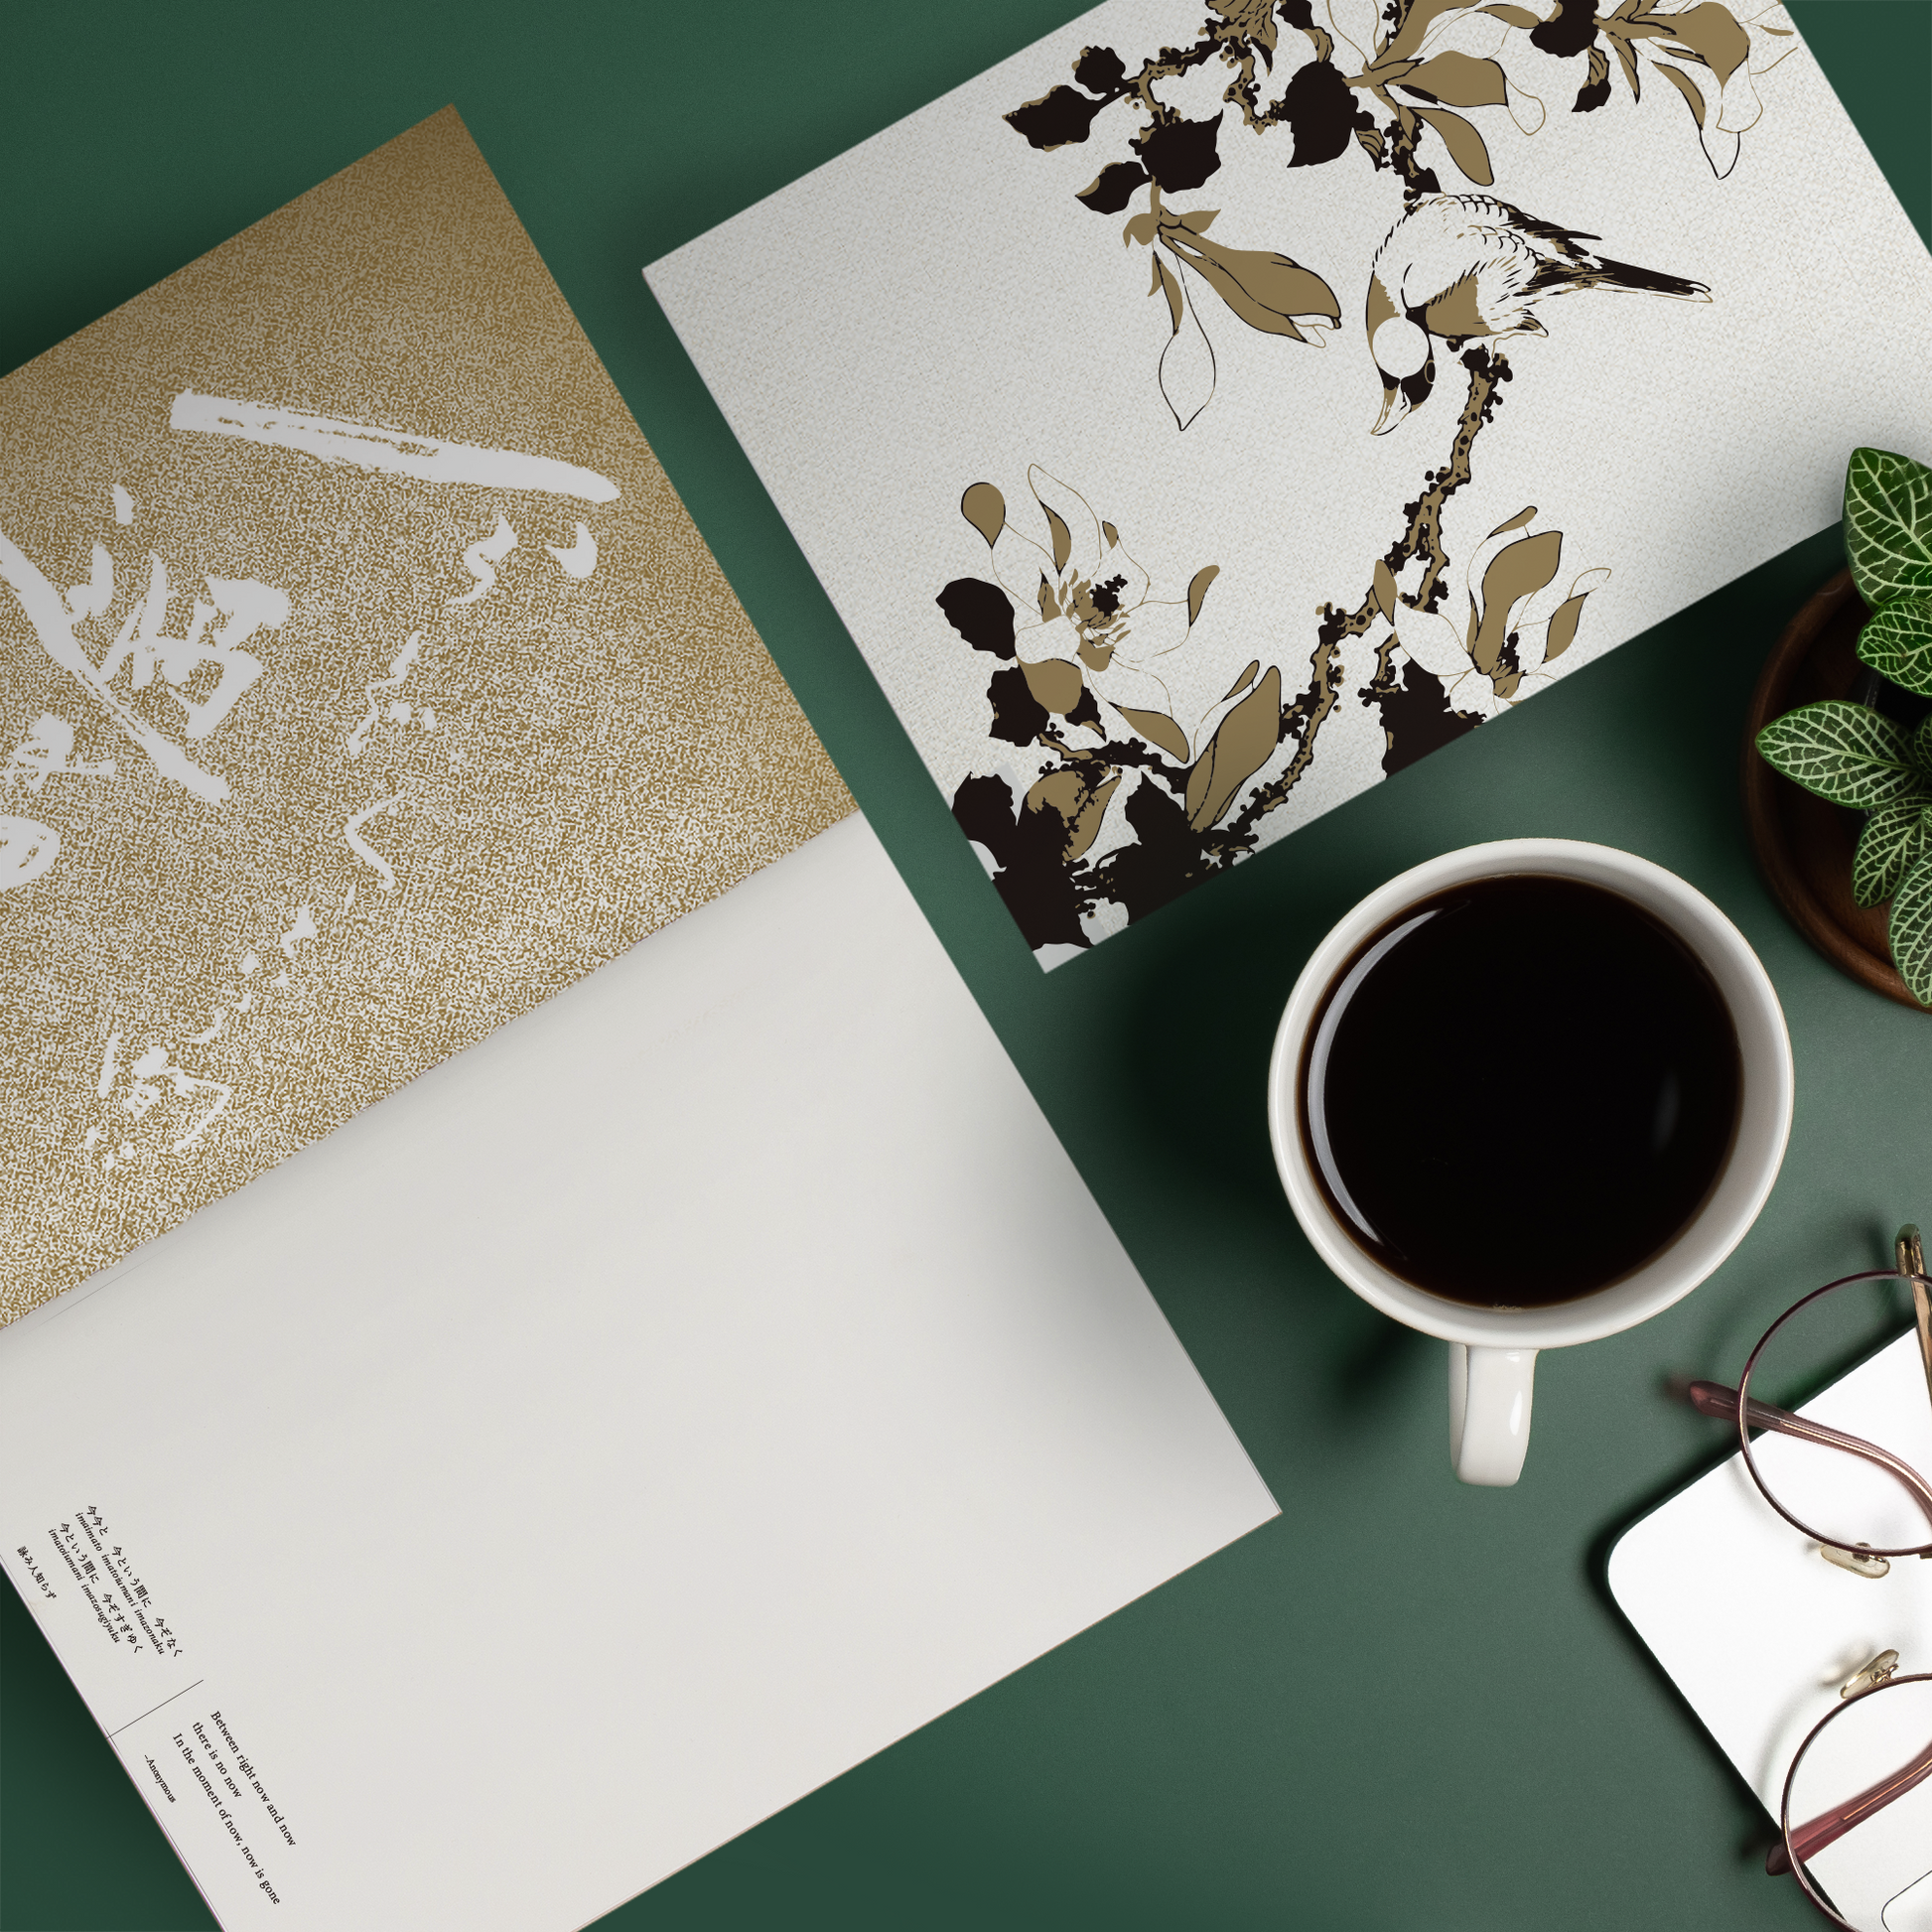 The MISOHITOMOJI notebook is made with easy-to-write ECO paper, and features waka poems in Japanese and romaji with English translations at the bottom of each page.